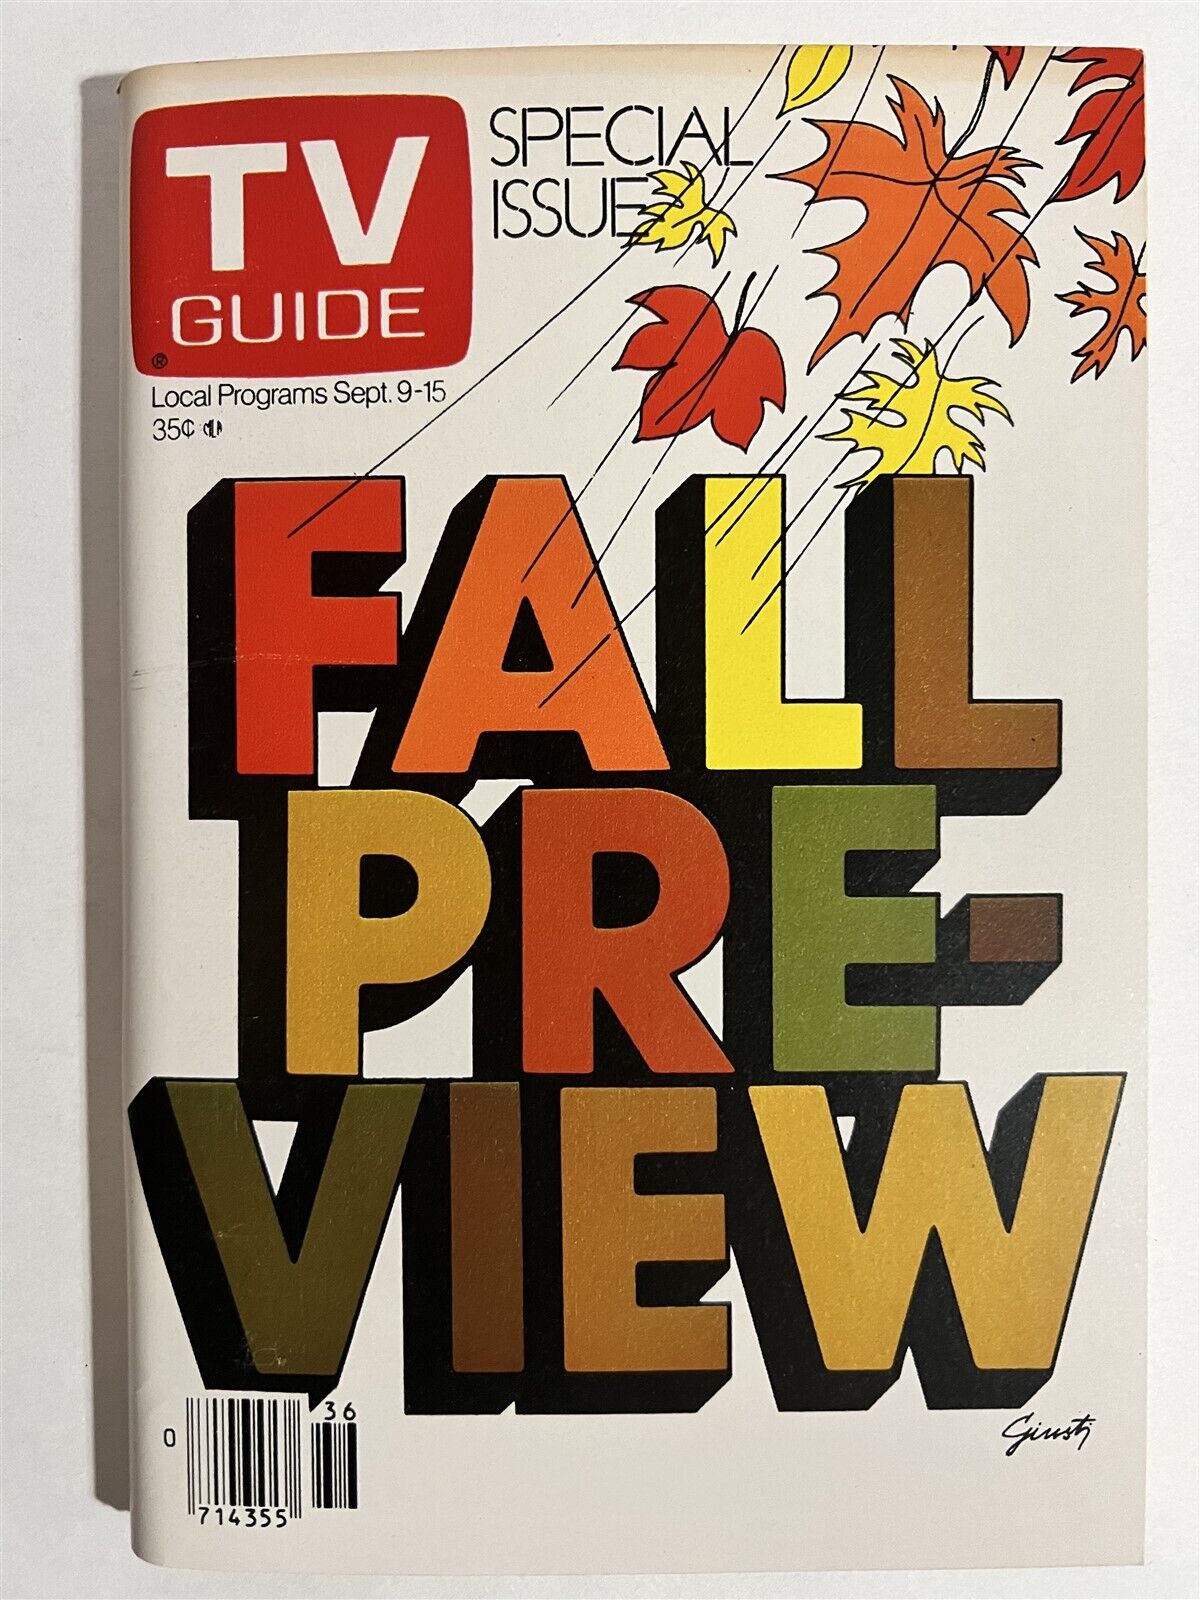 TV GUIDE SEPT 9-15, 1978 FALL PREVIEW BATTLESTAR GALACTICA, MARY, WKRP & MORE